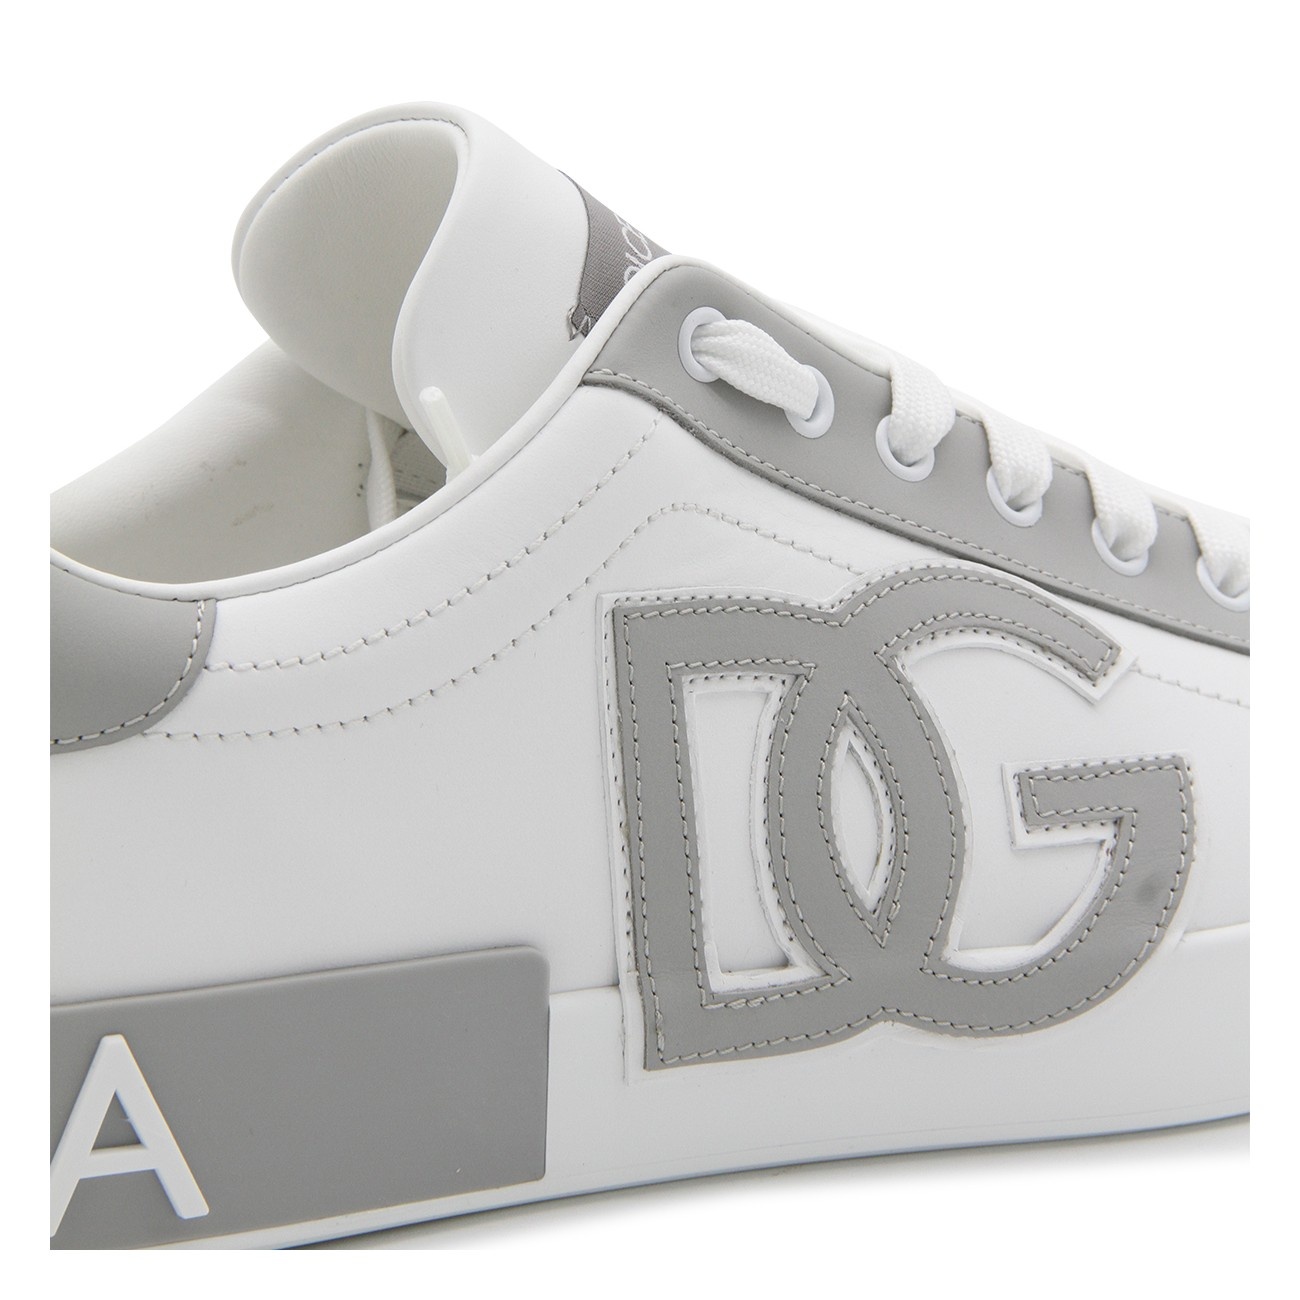 white and grey leather sneakers - 4